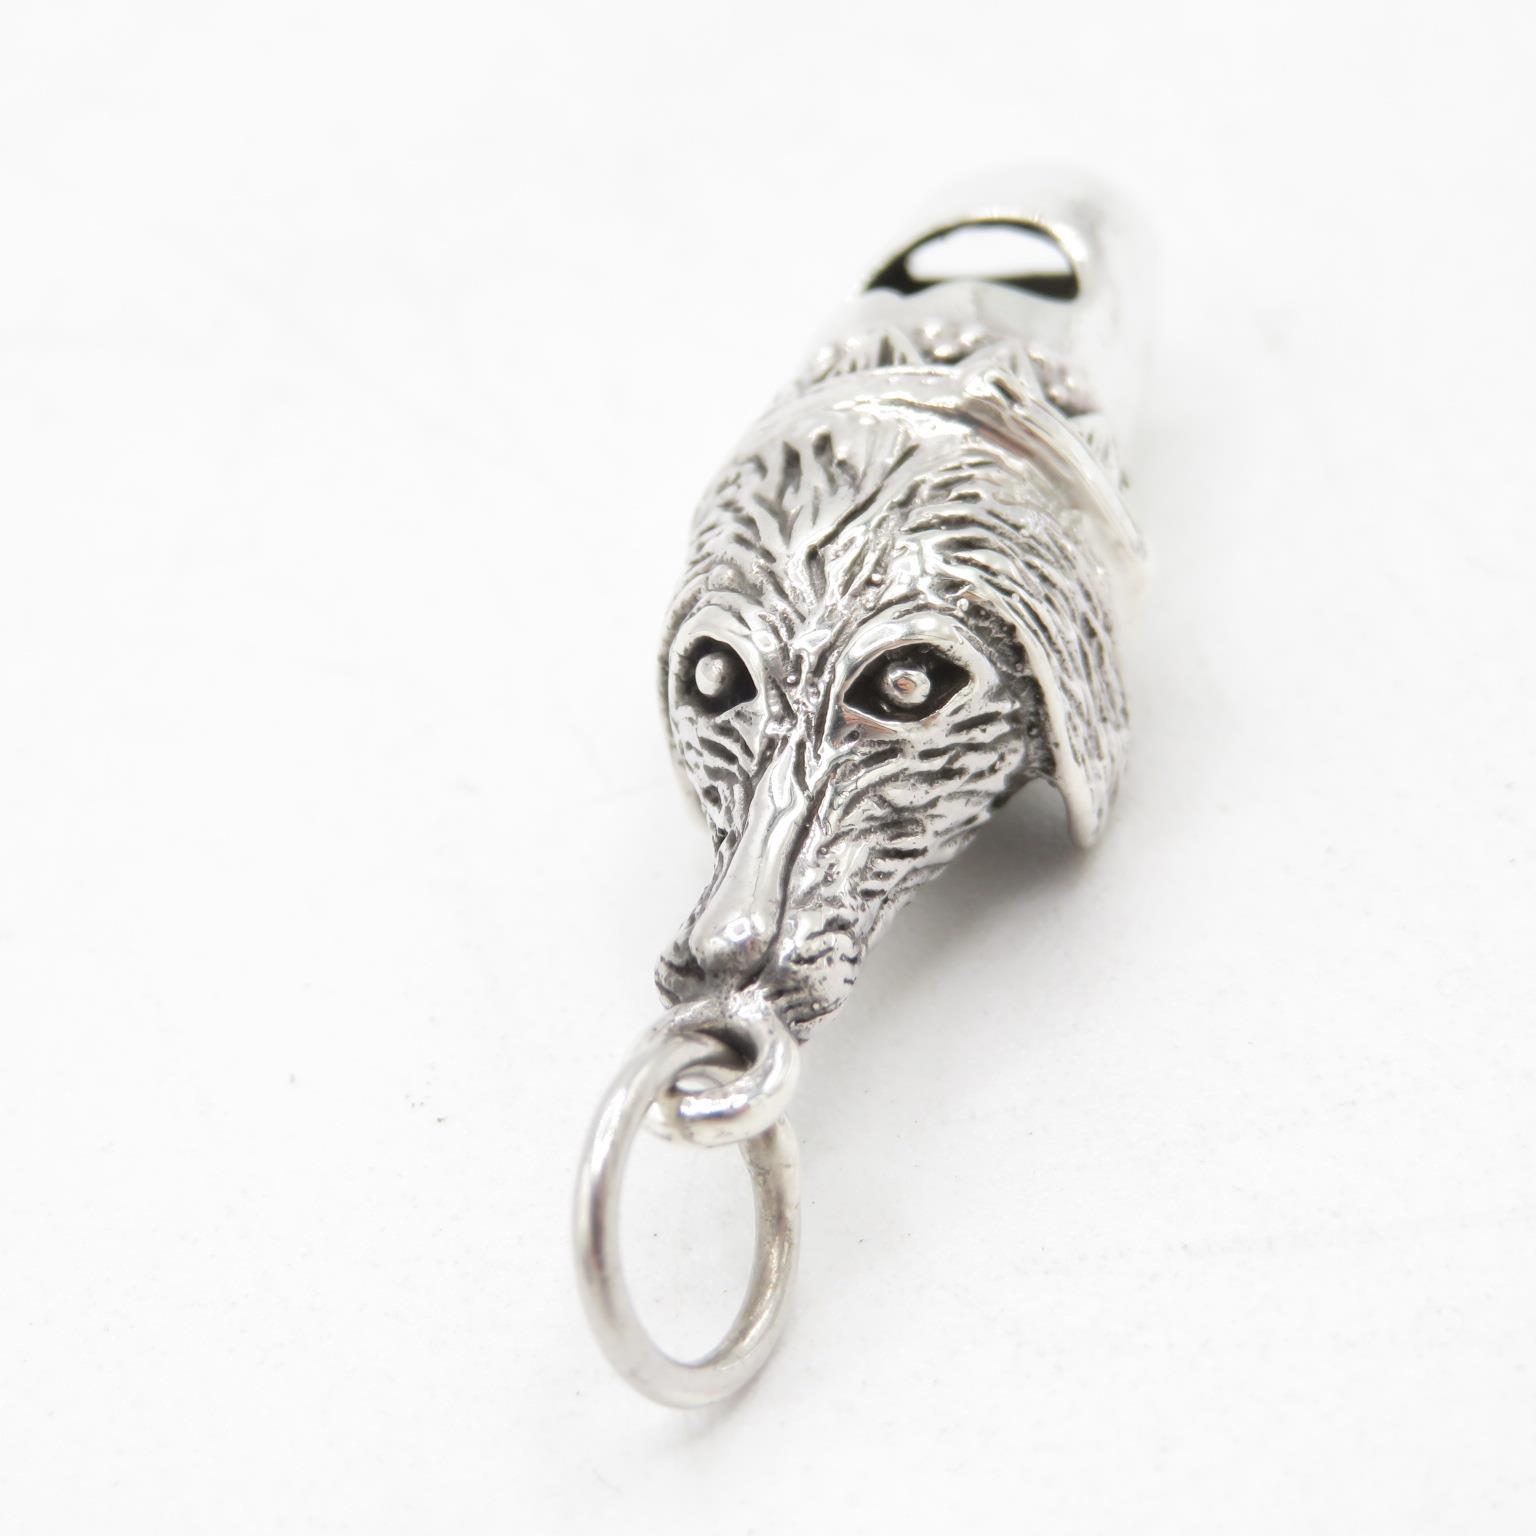 HM 925 Sterling Silver dog whistle with fob ring and detailed dog head design fully working (11. - Image 2 of 5